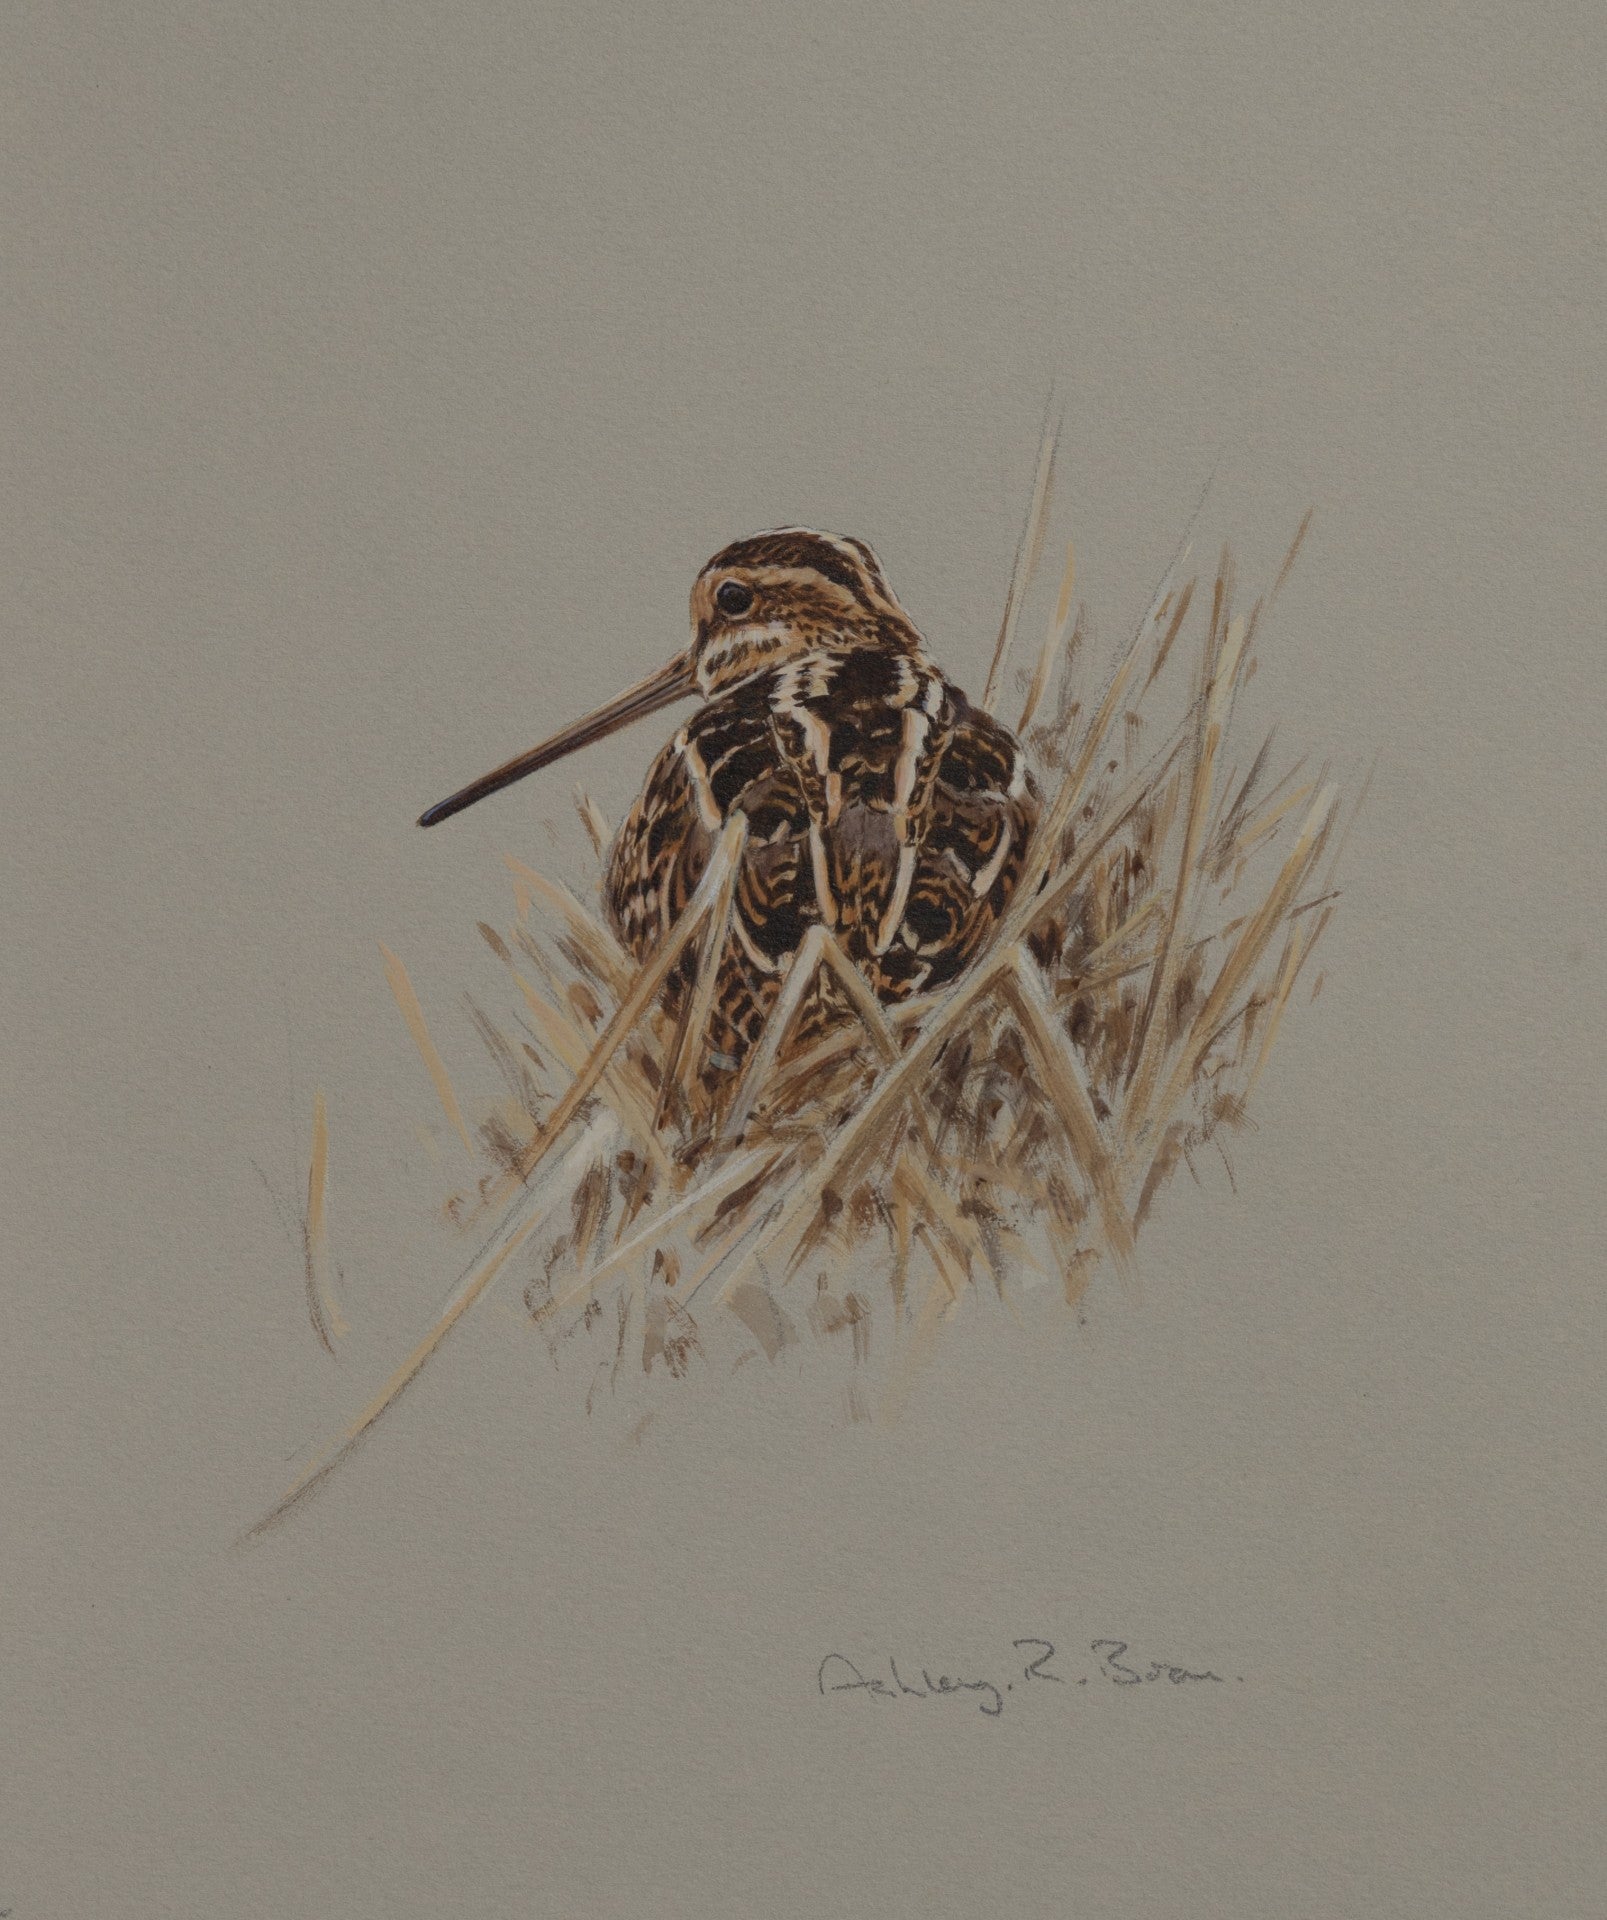 'Snipe in Reeds' Original watercolour by Ashley Boon - 9.5" x 8.25"